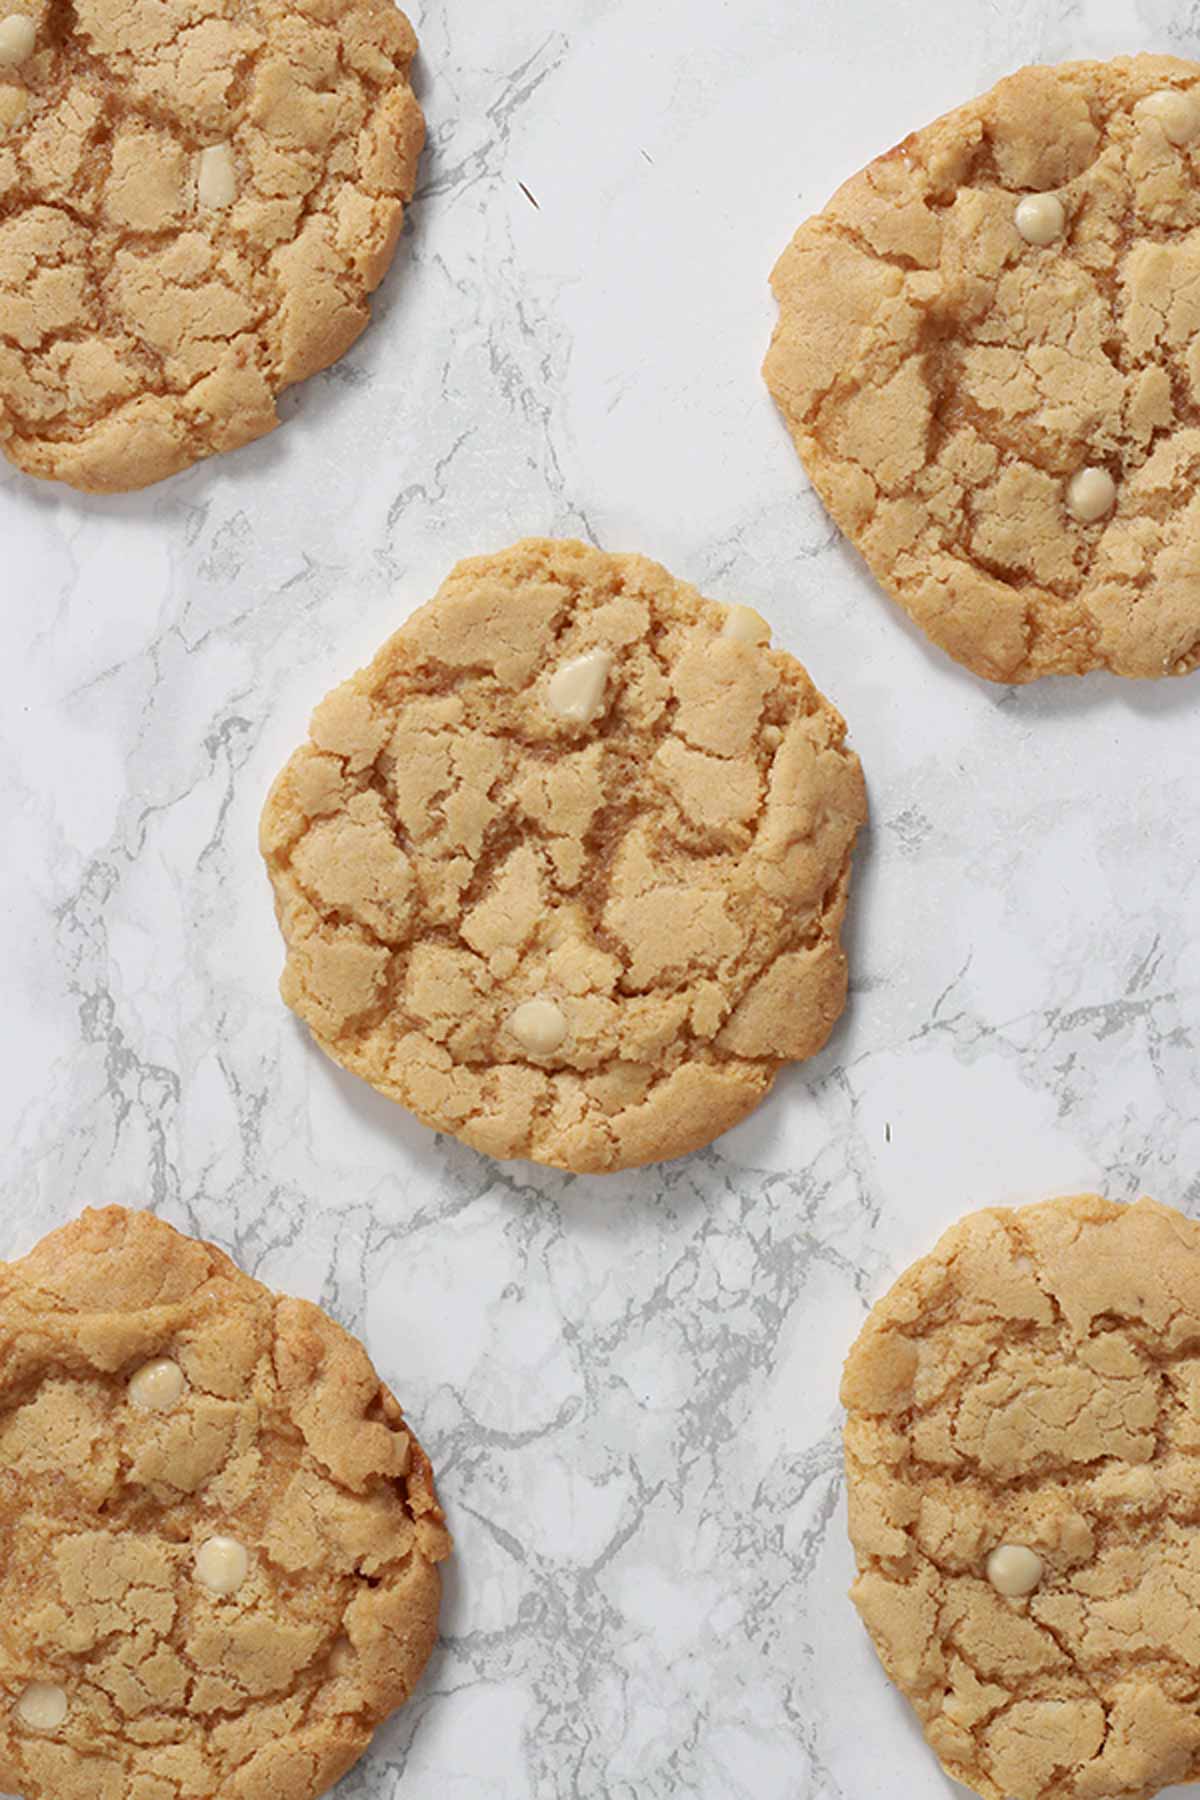 Gluten Free Macadamia Cookies Laying On A White Backdrop